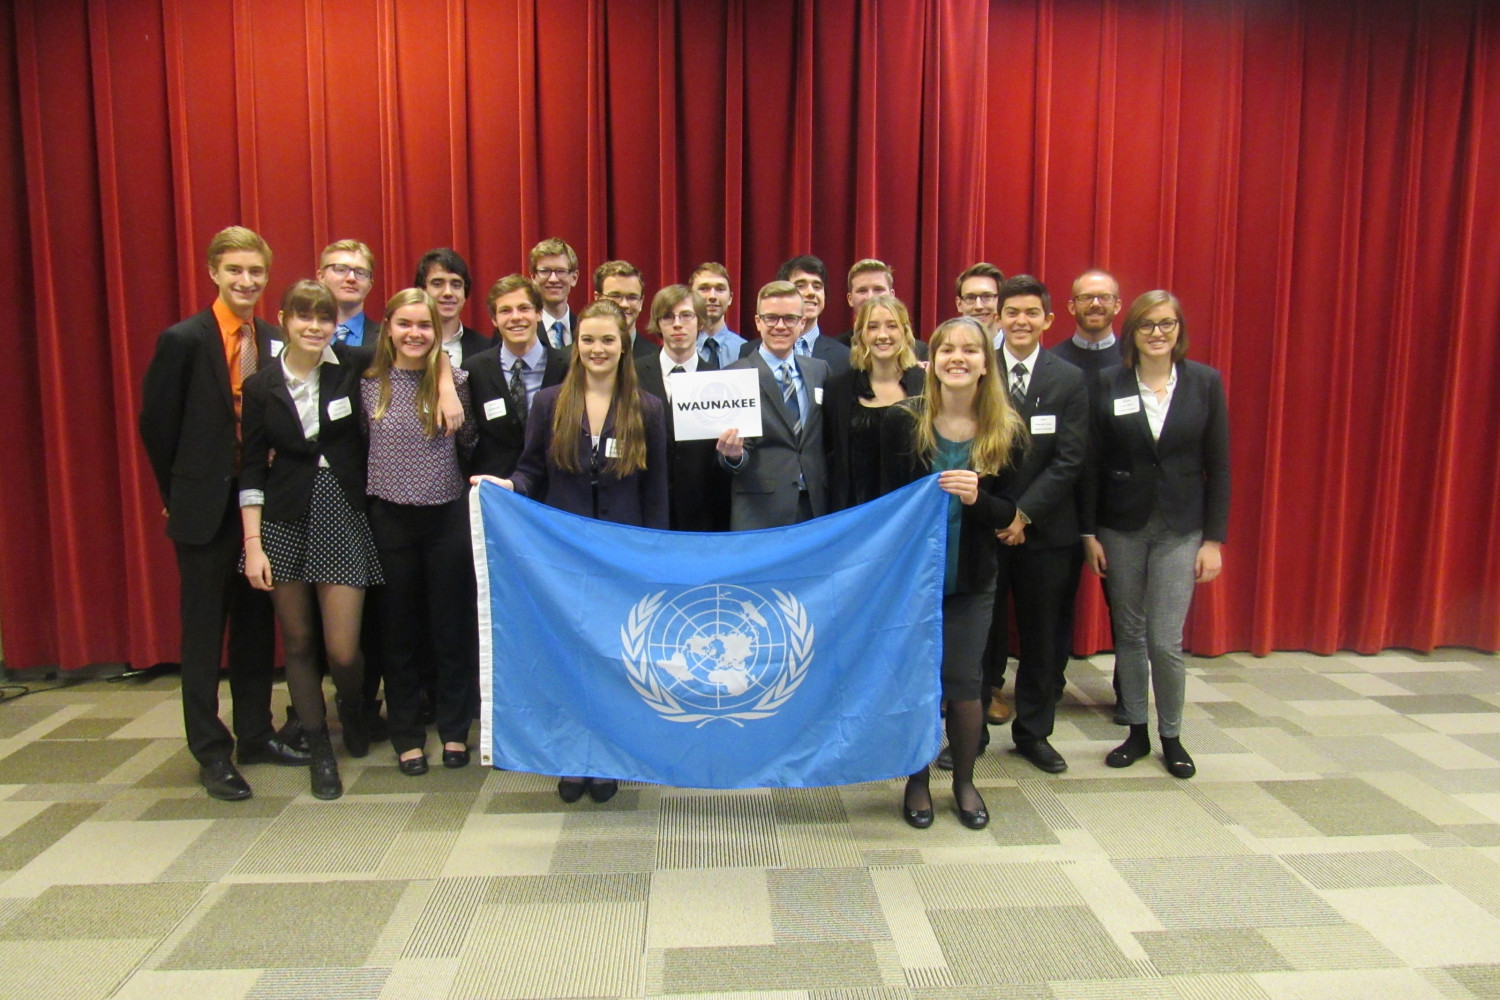 Waunakee High School at the 2017 Model UN High School Conference at Carthage.